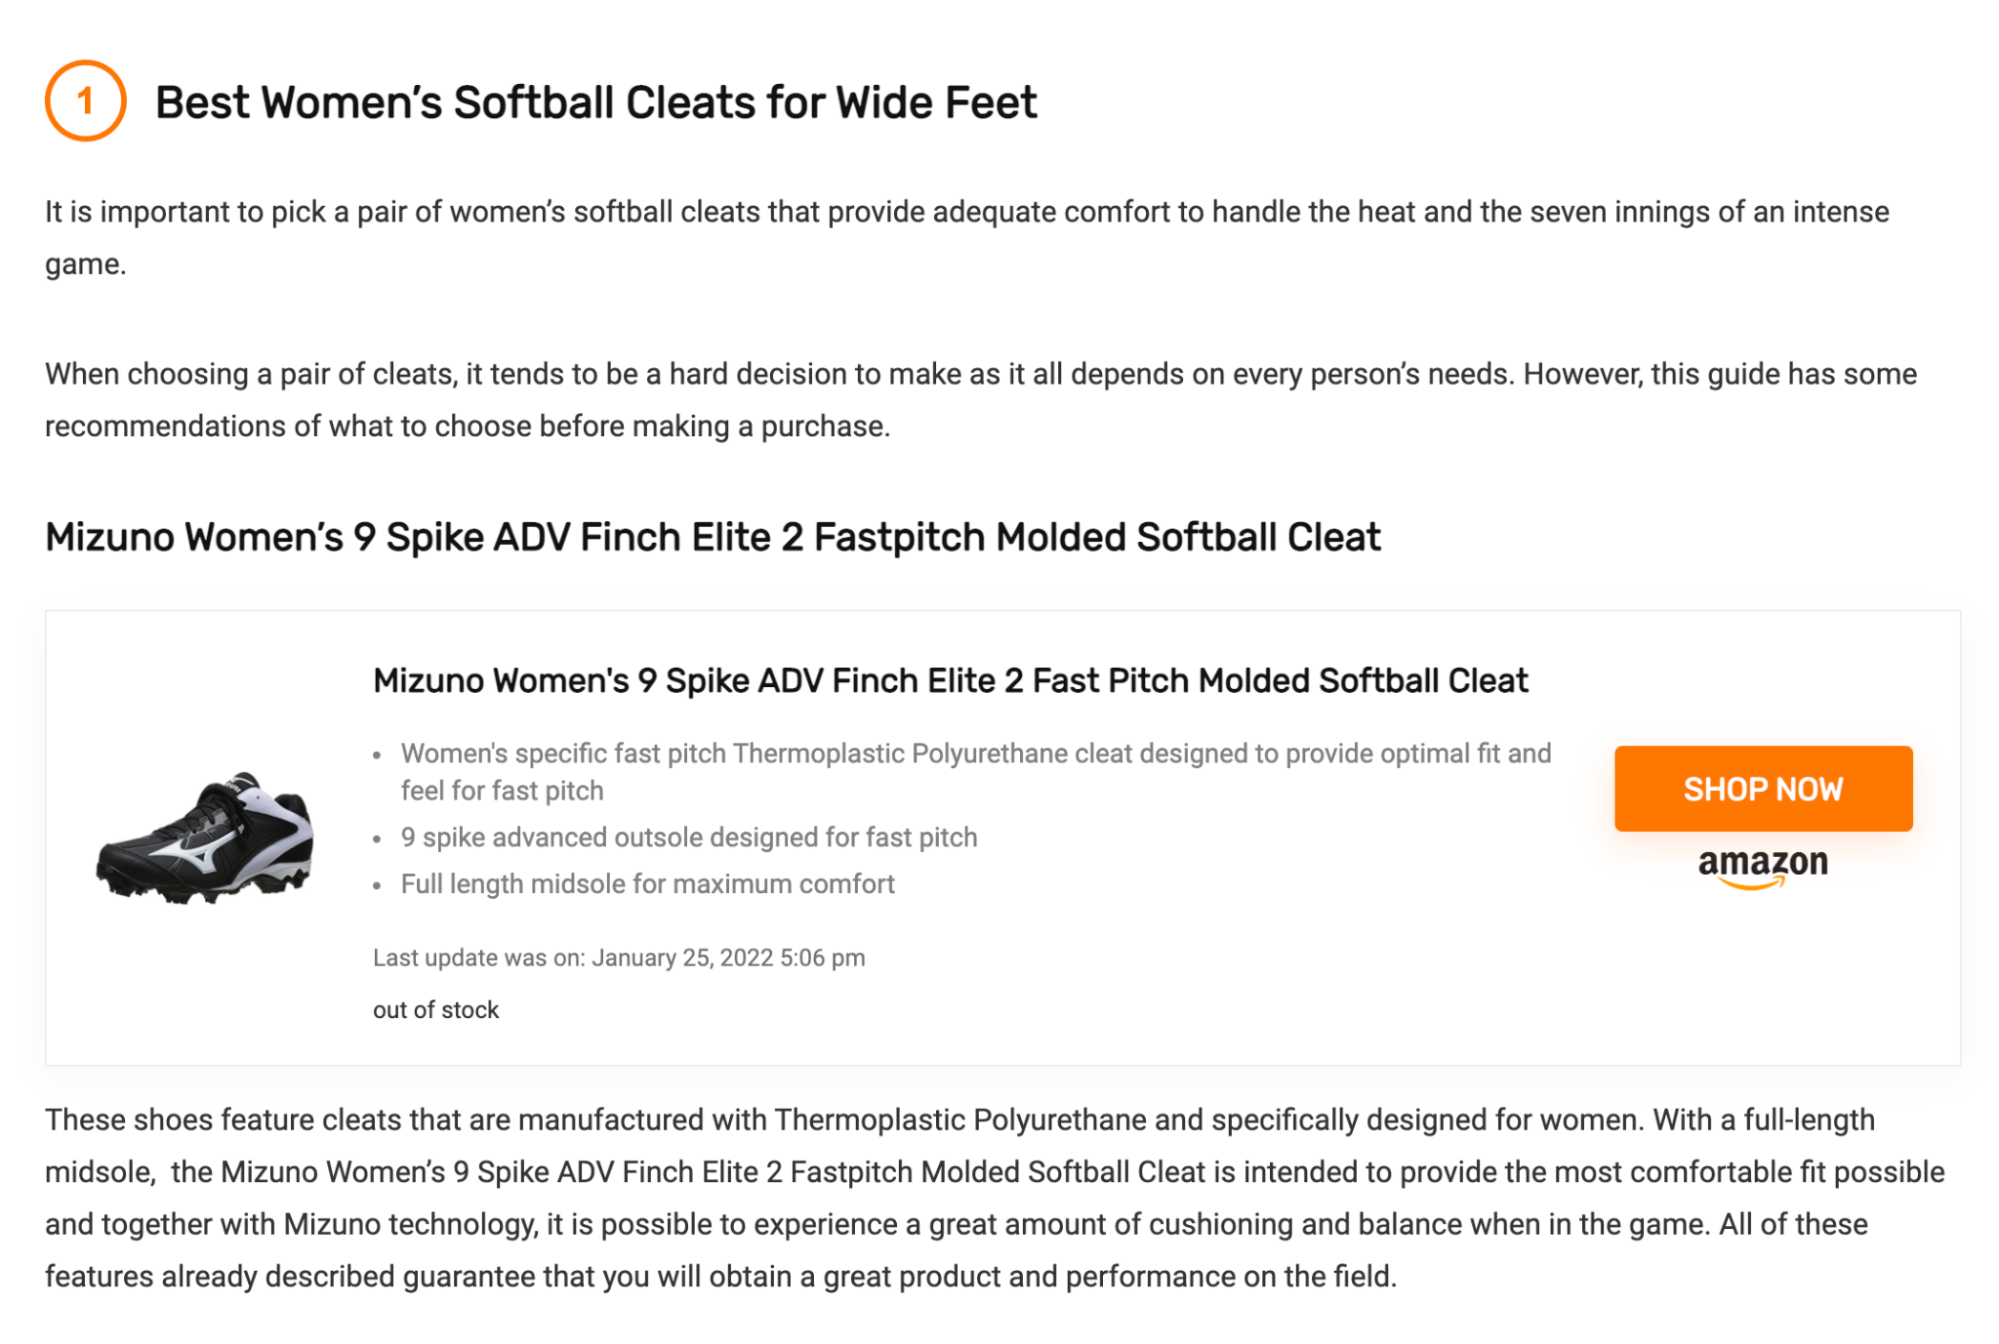 A review of women's softball cleats on Base Loaded Softball includes an Amazon purchase link button